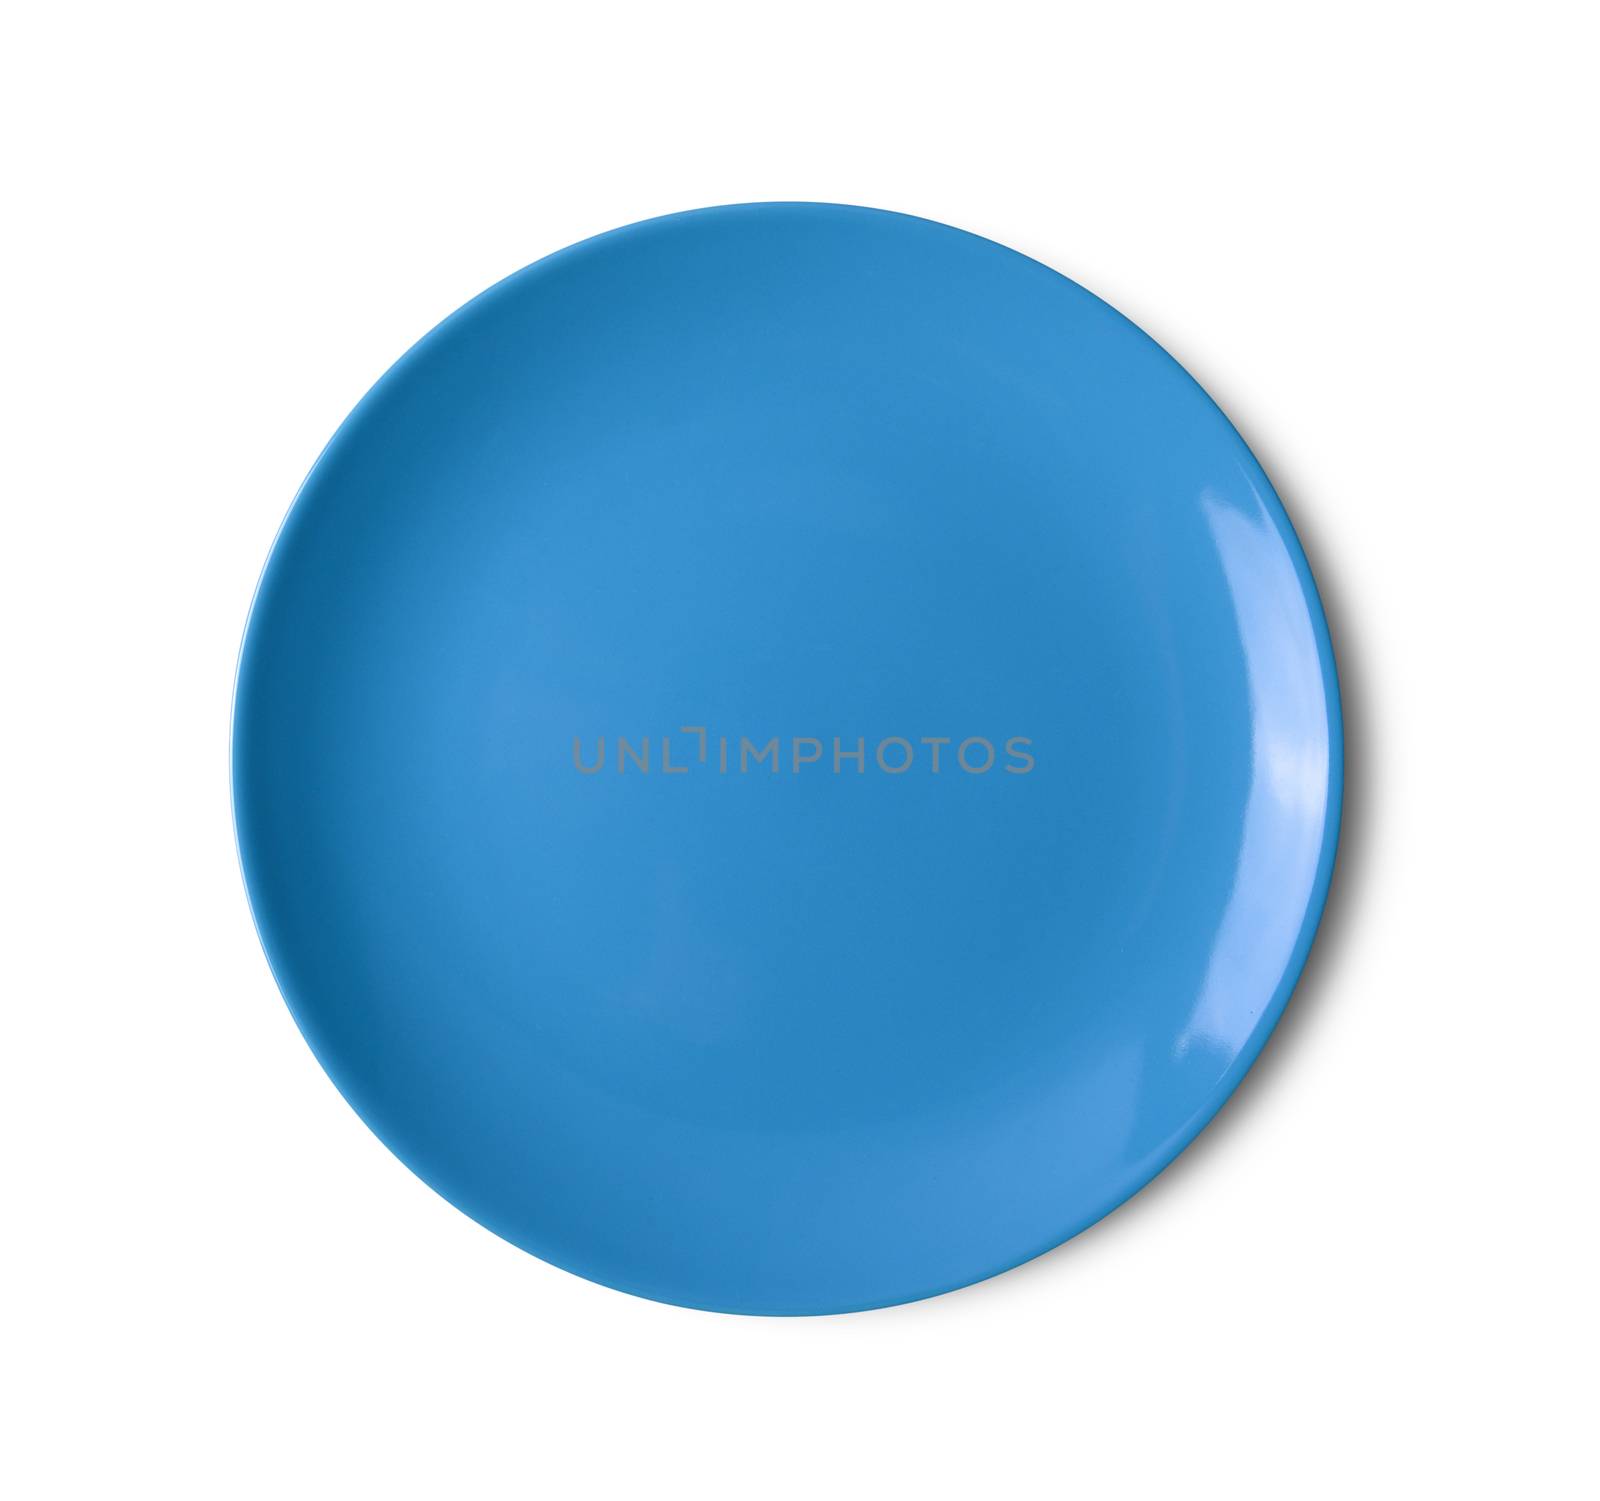 blue plate on white background